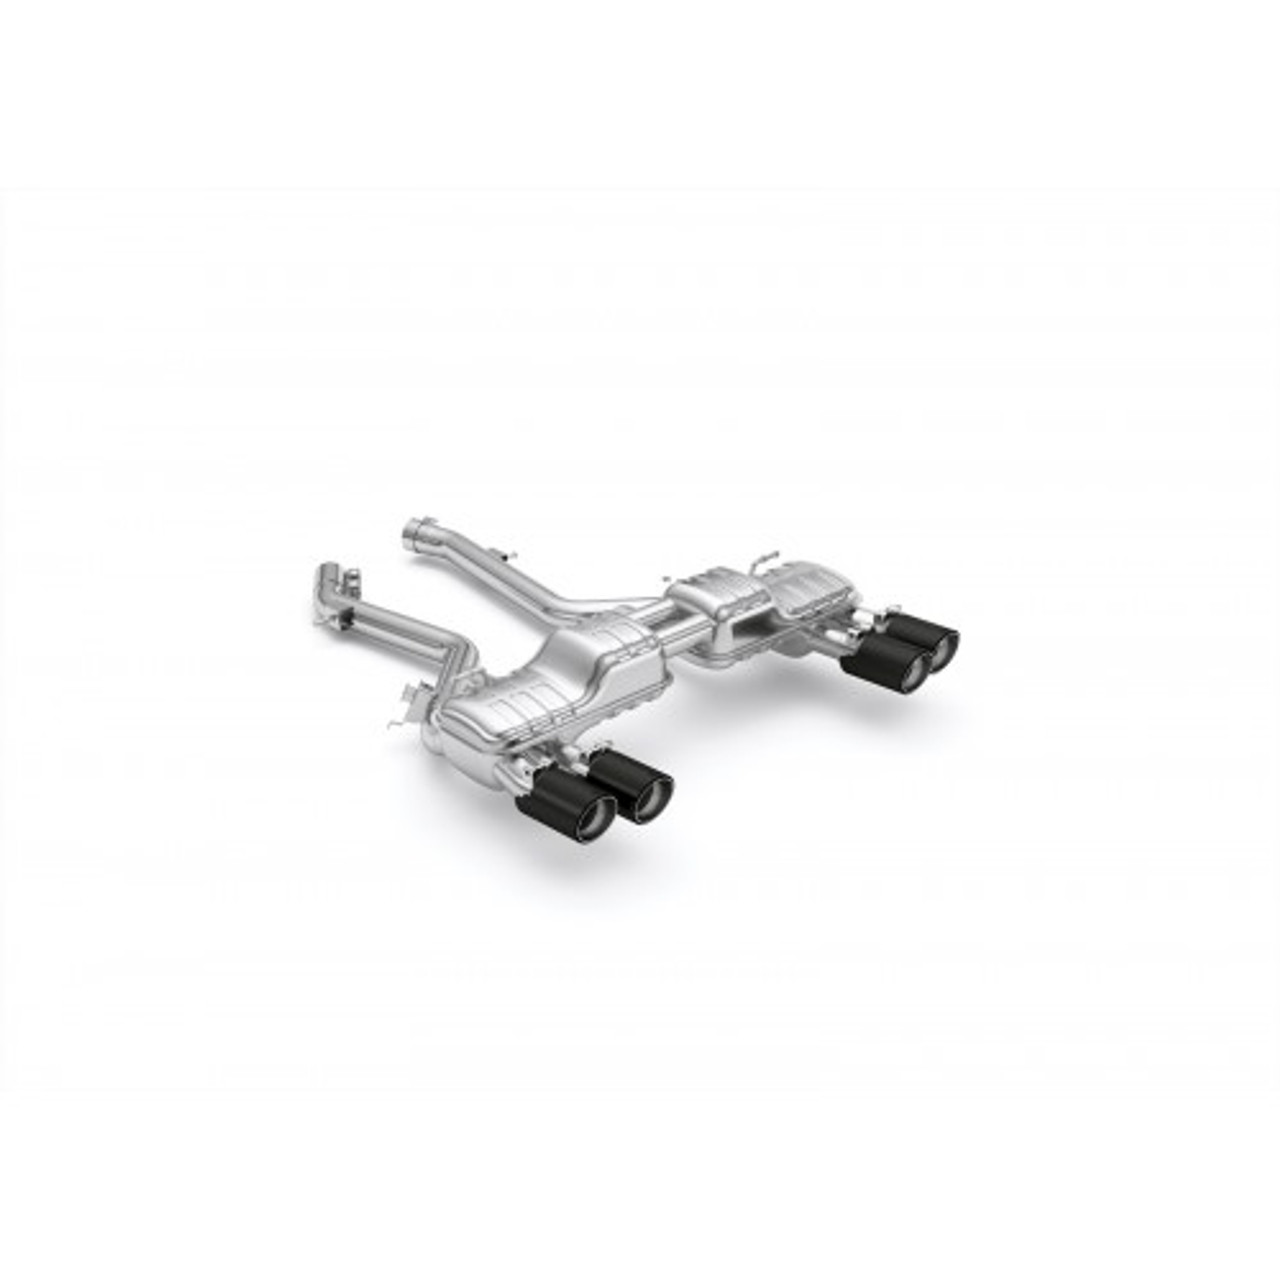 BMW Valved Performance Sport Exhaust System with Carbon Tips - Eisenmann B5462.00904.C